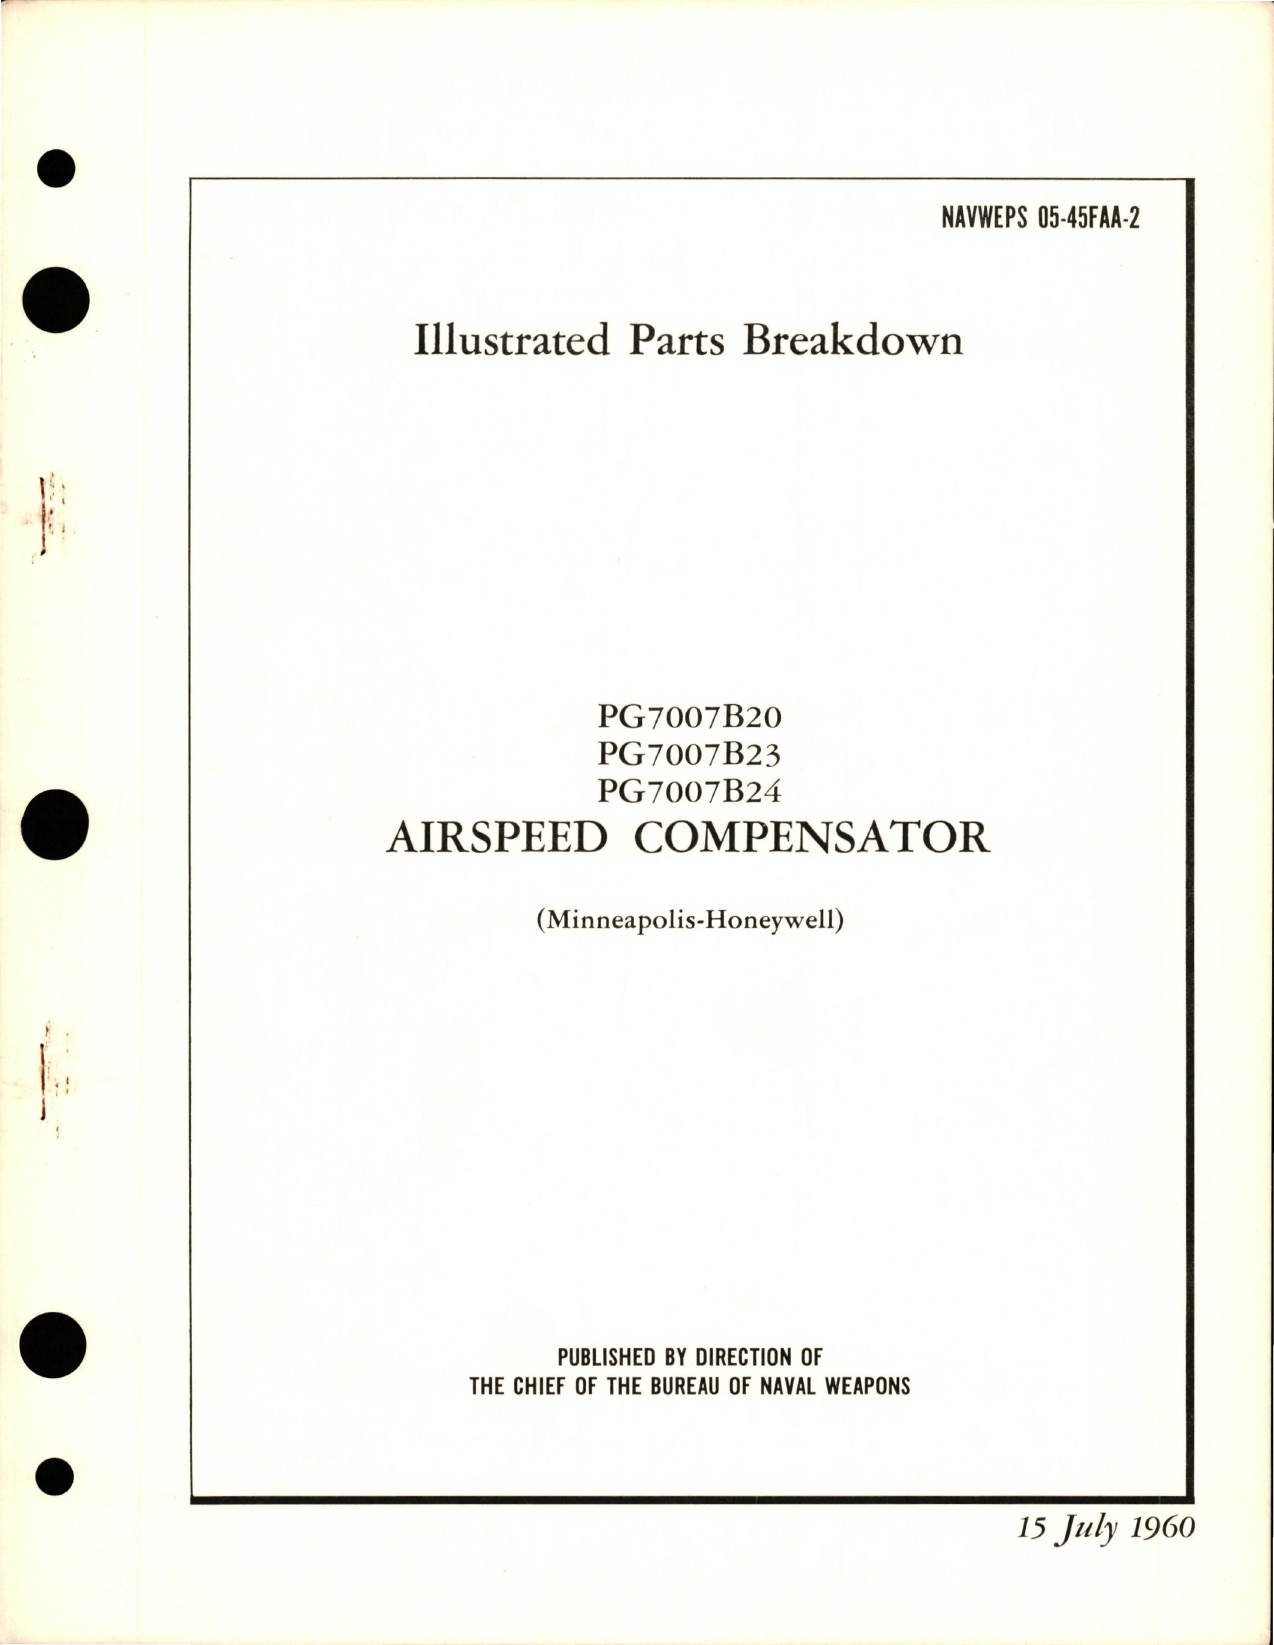 Sample page 1 from AirCorps Library document: Illustrated Parts Breakdown for Airspeed Compensator - PG7007B20, PG7007B23, and PG7007B24